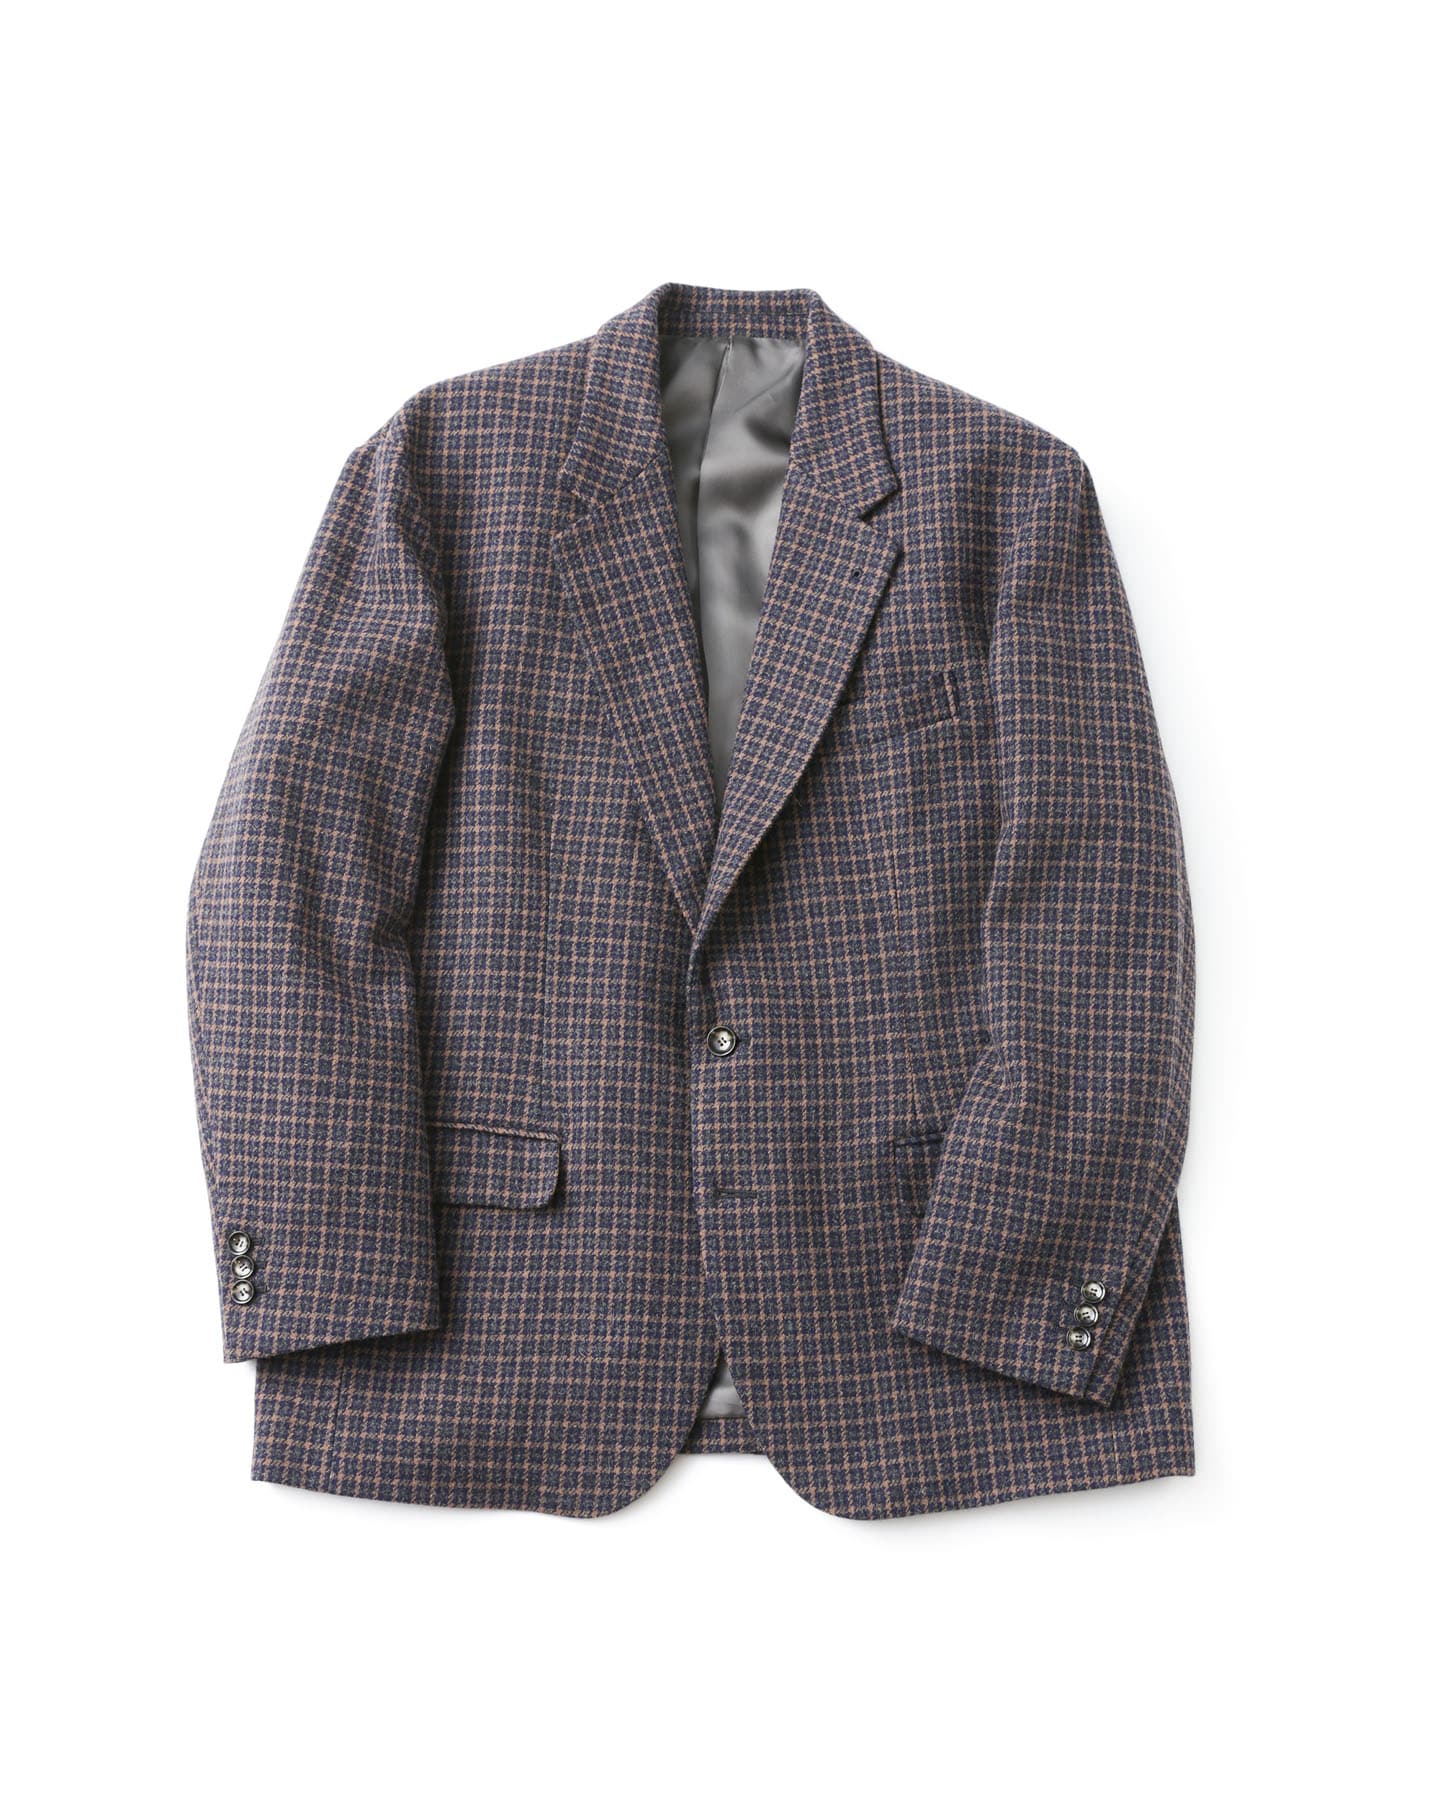 SOPH. | BLENDED WOOL CLASSIC 2BUTTON JACKET(M NAVY CHECK):